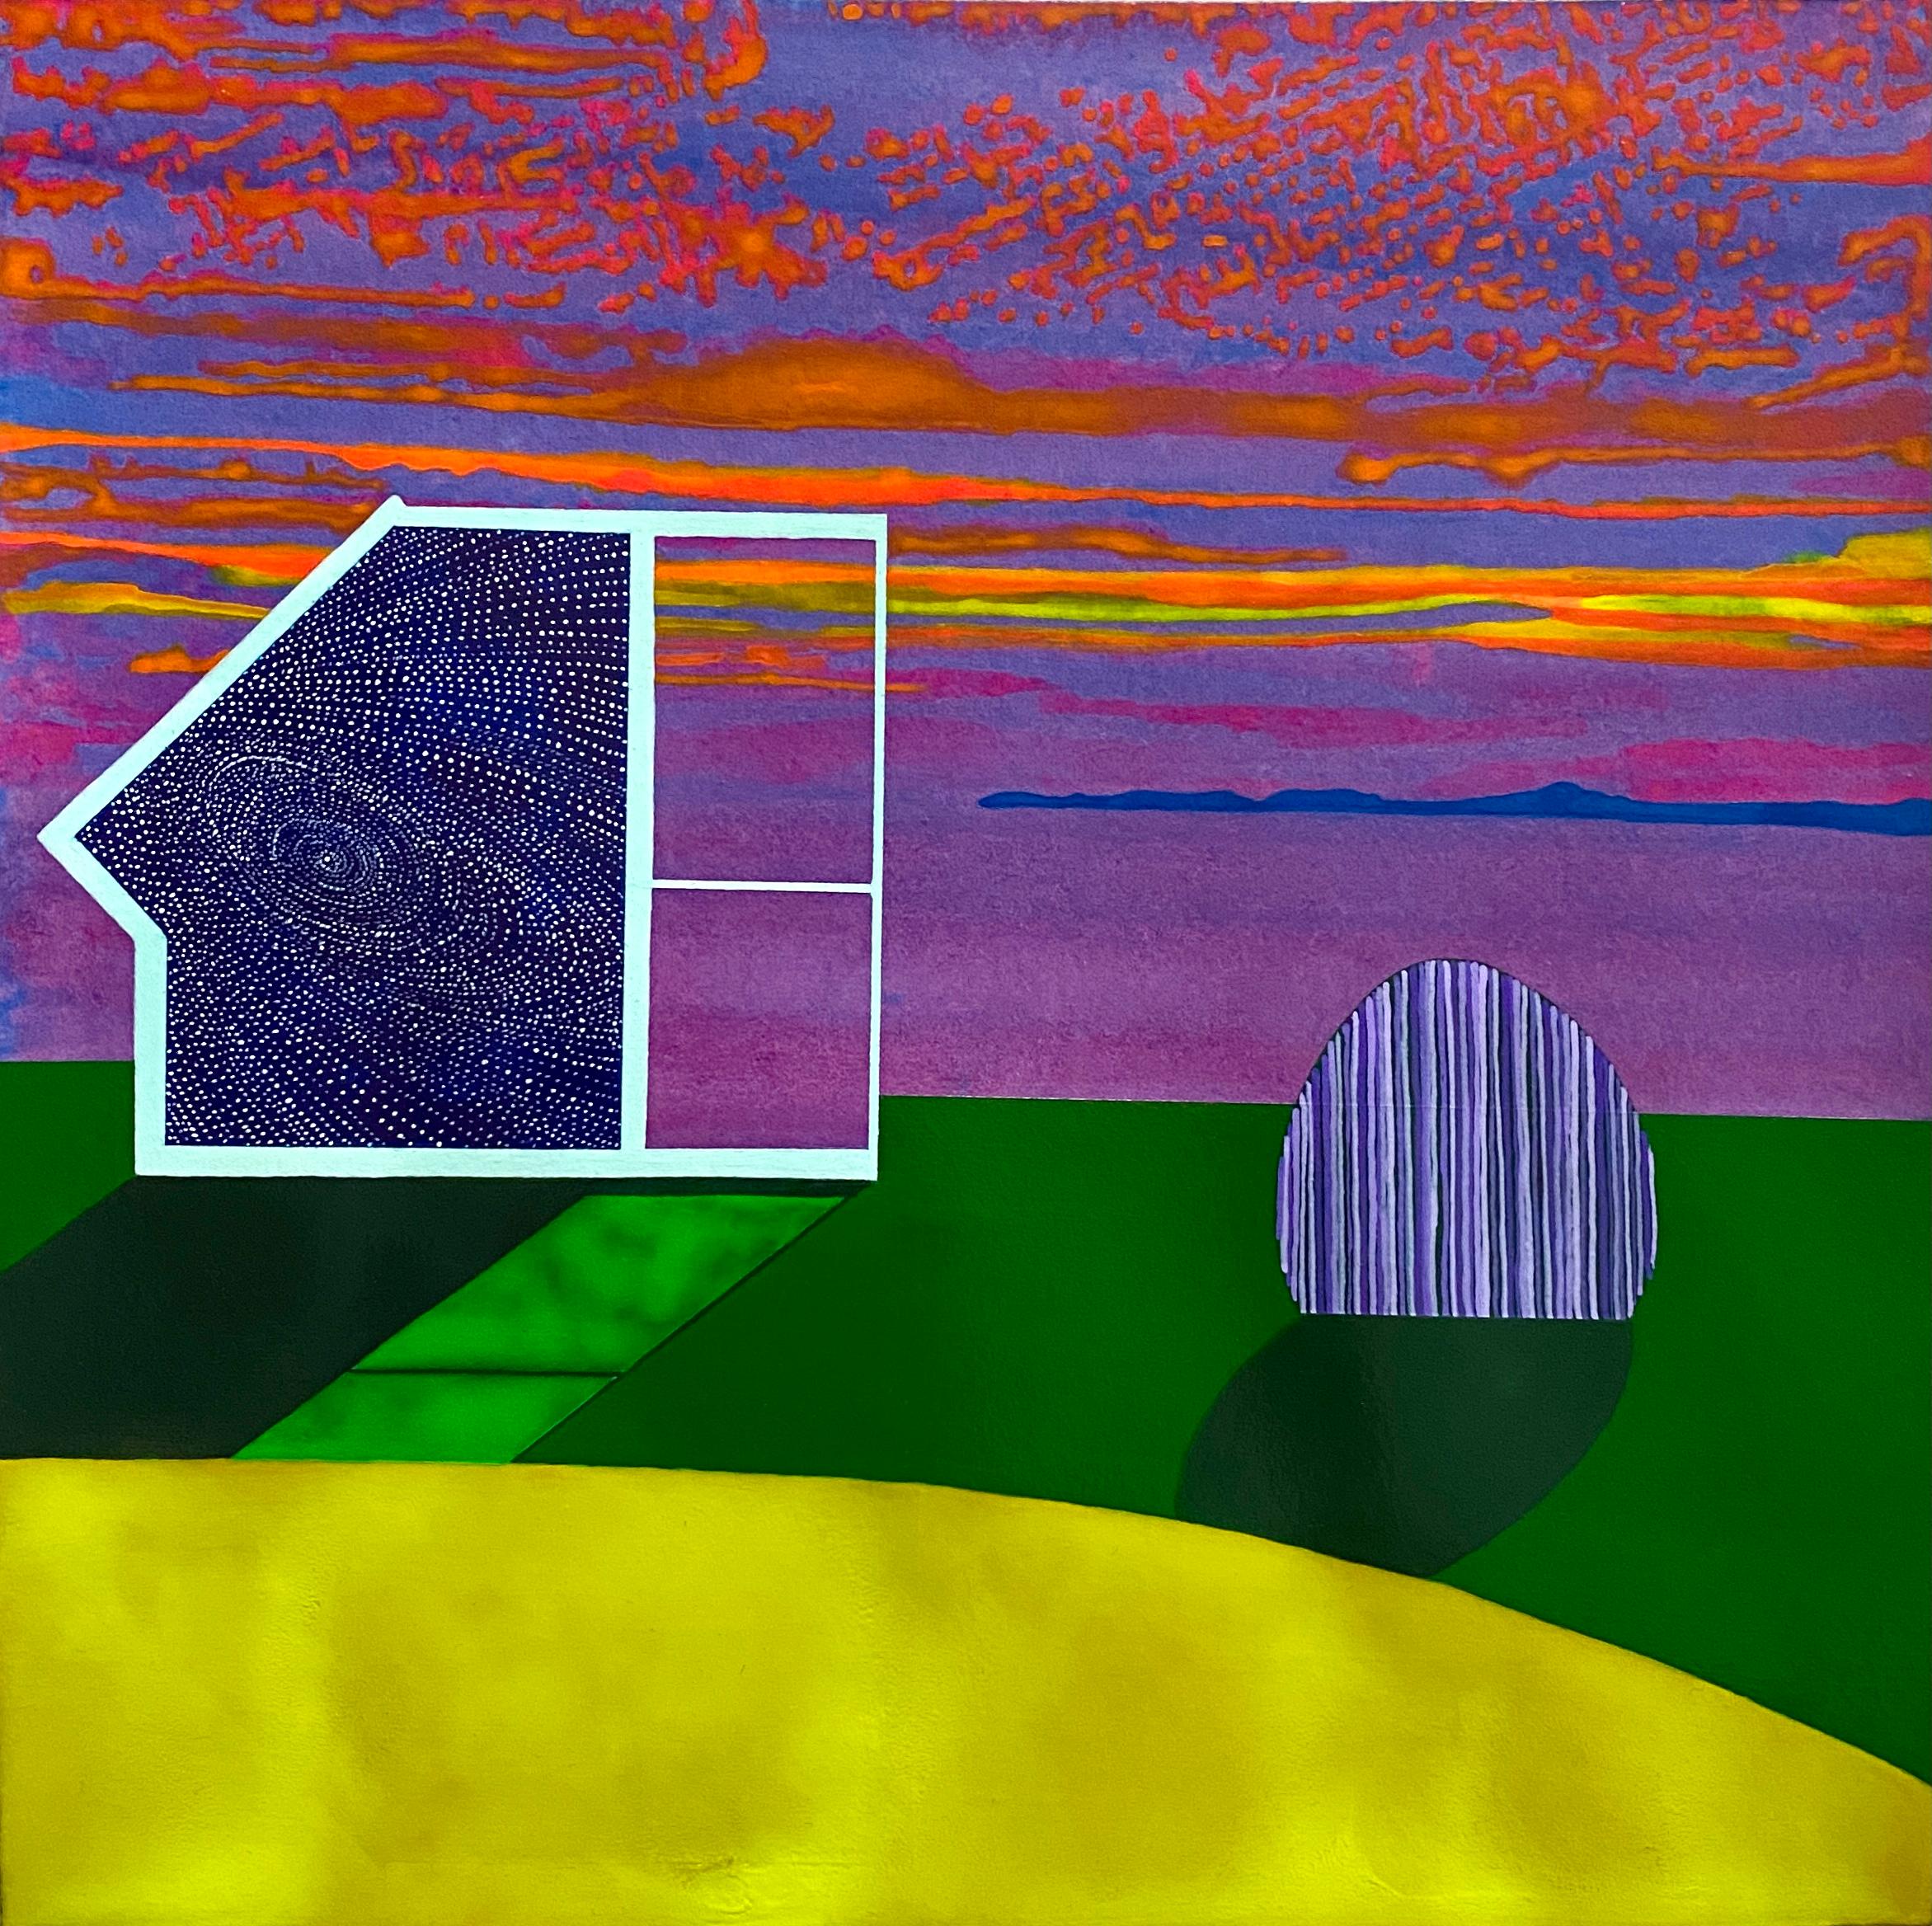 Departure, bright surrealistic painting of architecture against sunset